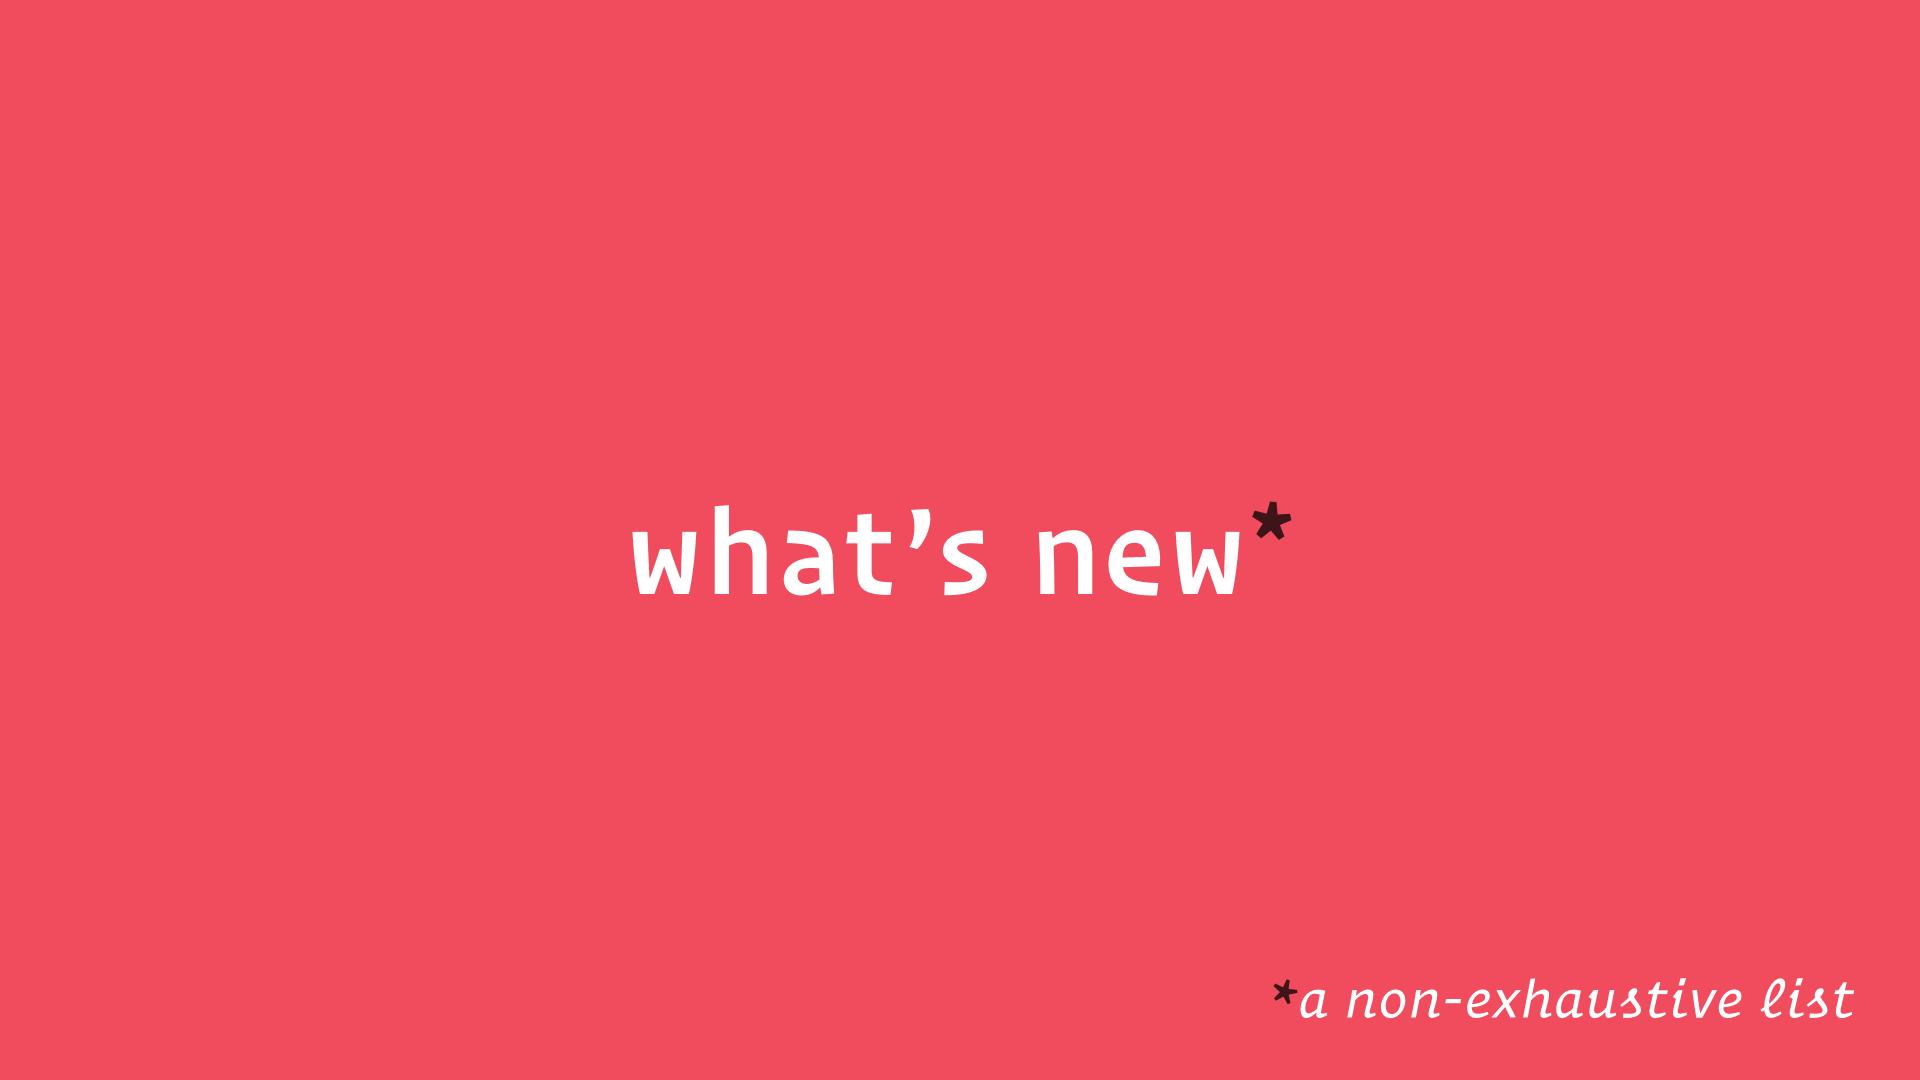 slide: what’s new (a non-exhaustive list)